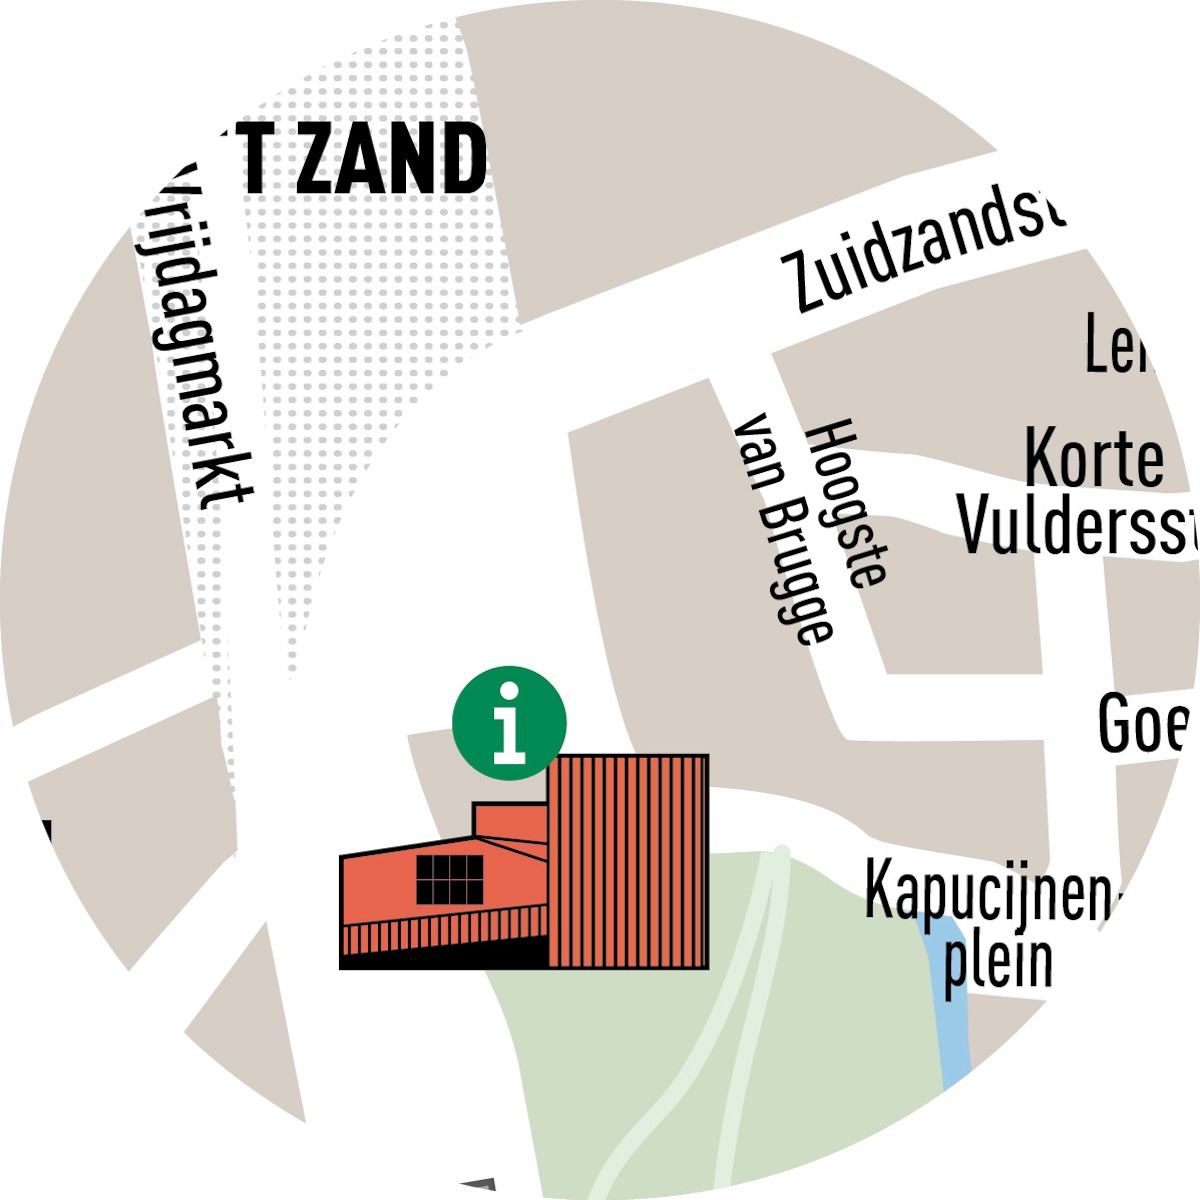 Detailed map of the area around 't Zand Square, indicating the tourist office at the Concert Hall